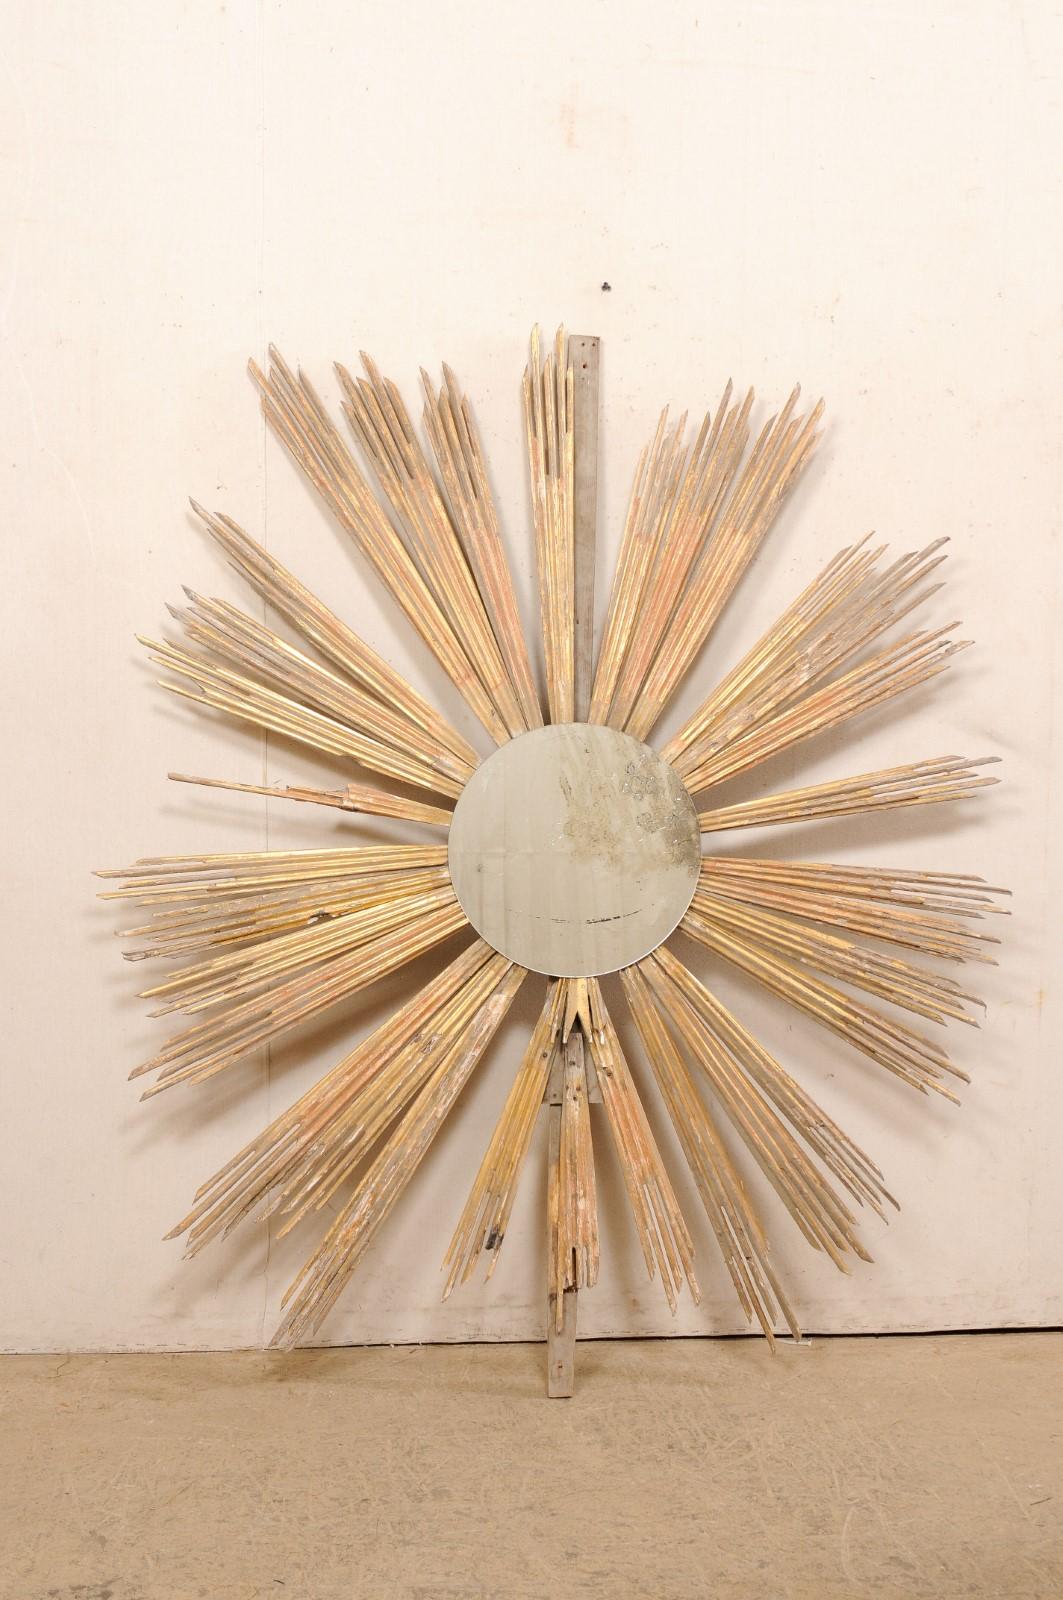 An Italian large-sized gilt-wood sunburst with mirror from the 19th century. This antique wall ornament from Italy features a serious of carved-wood, gold gilt rays shooting outwardly (in undulating lengths), with a round-shaped mirror anchored